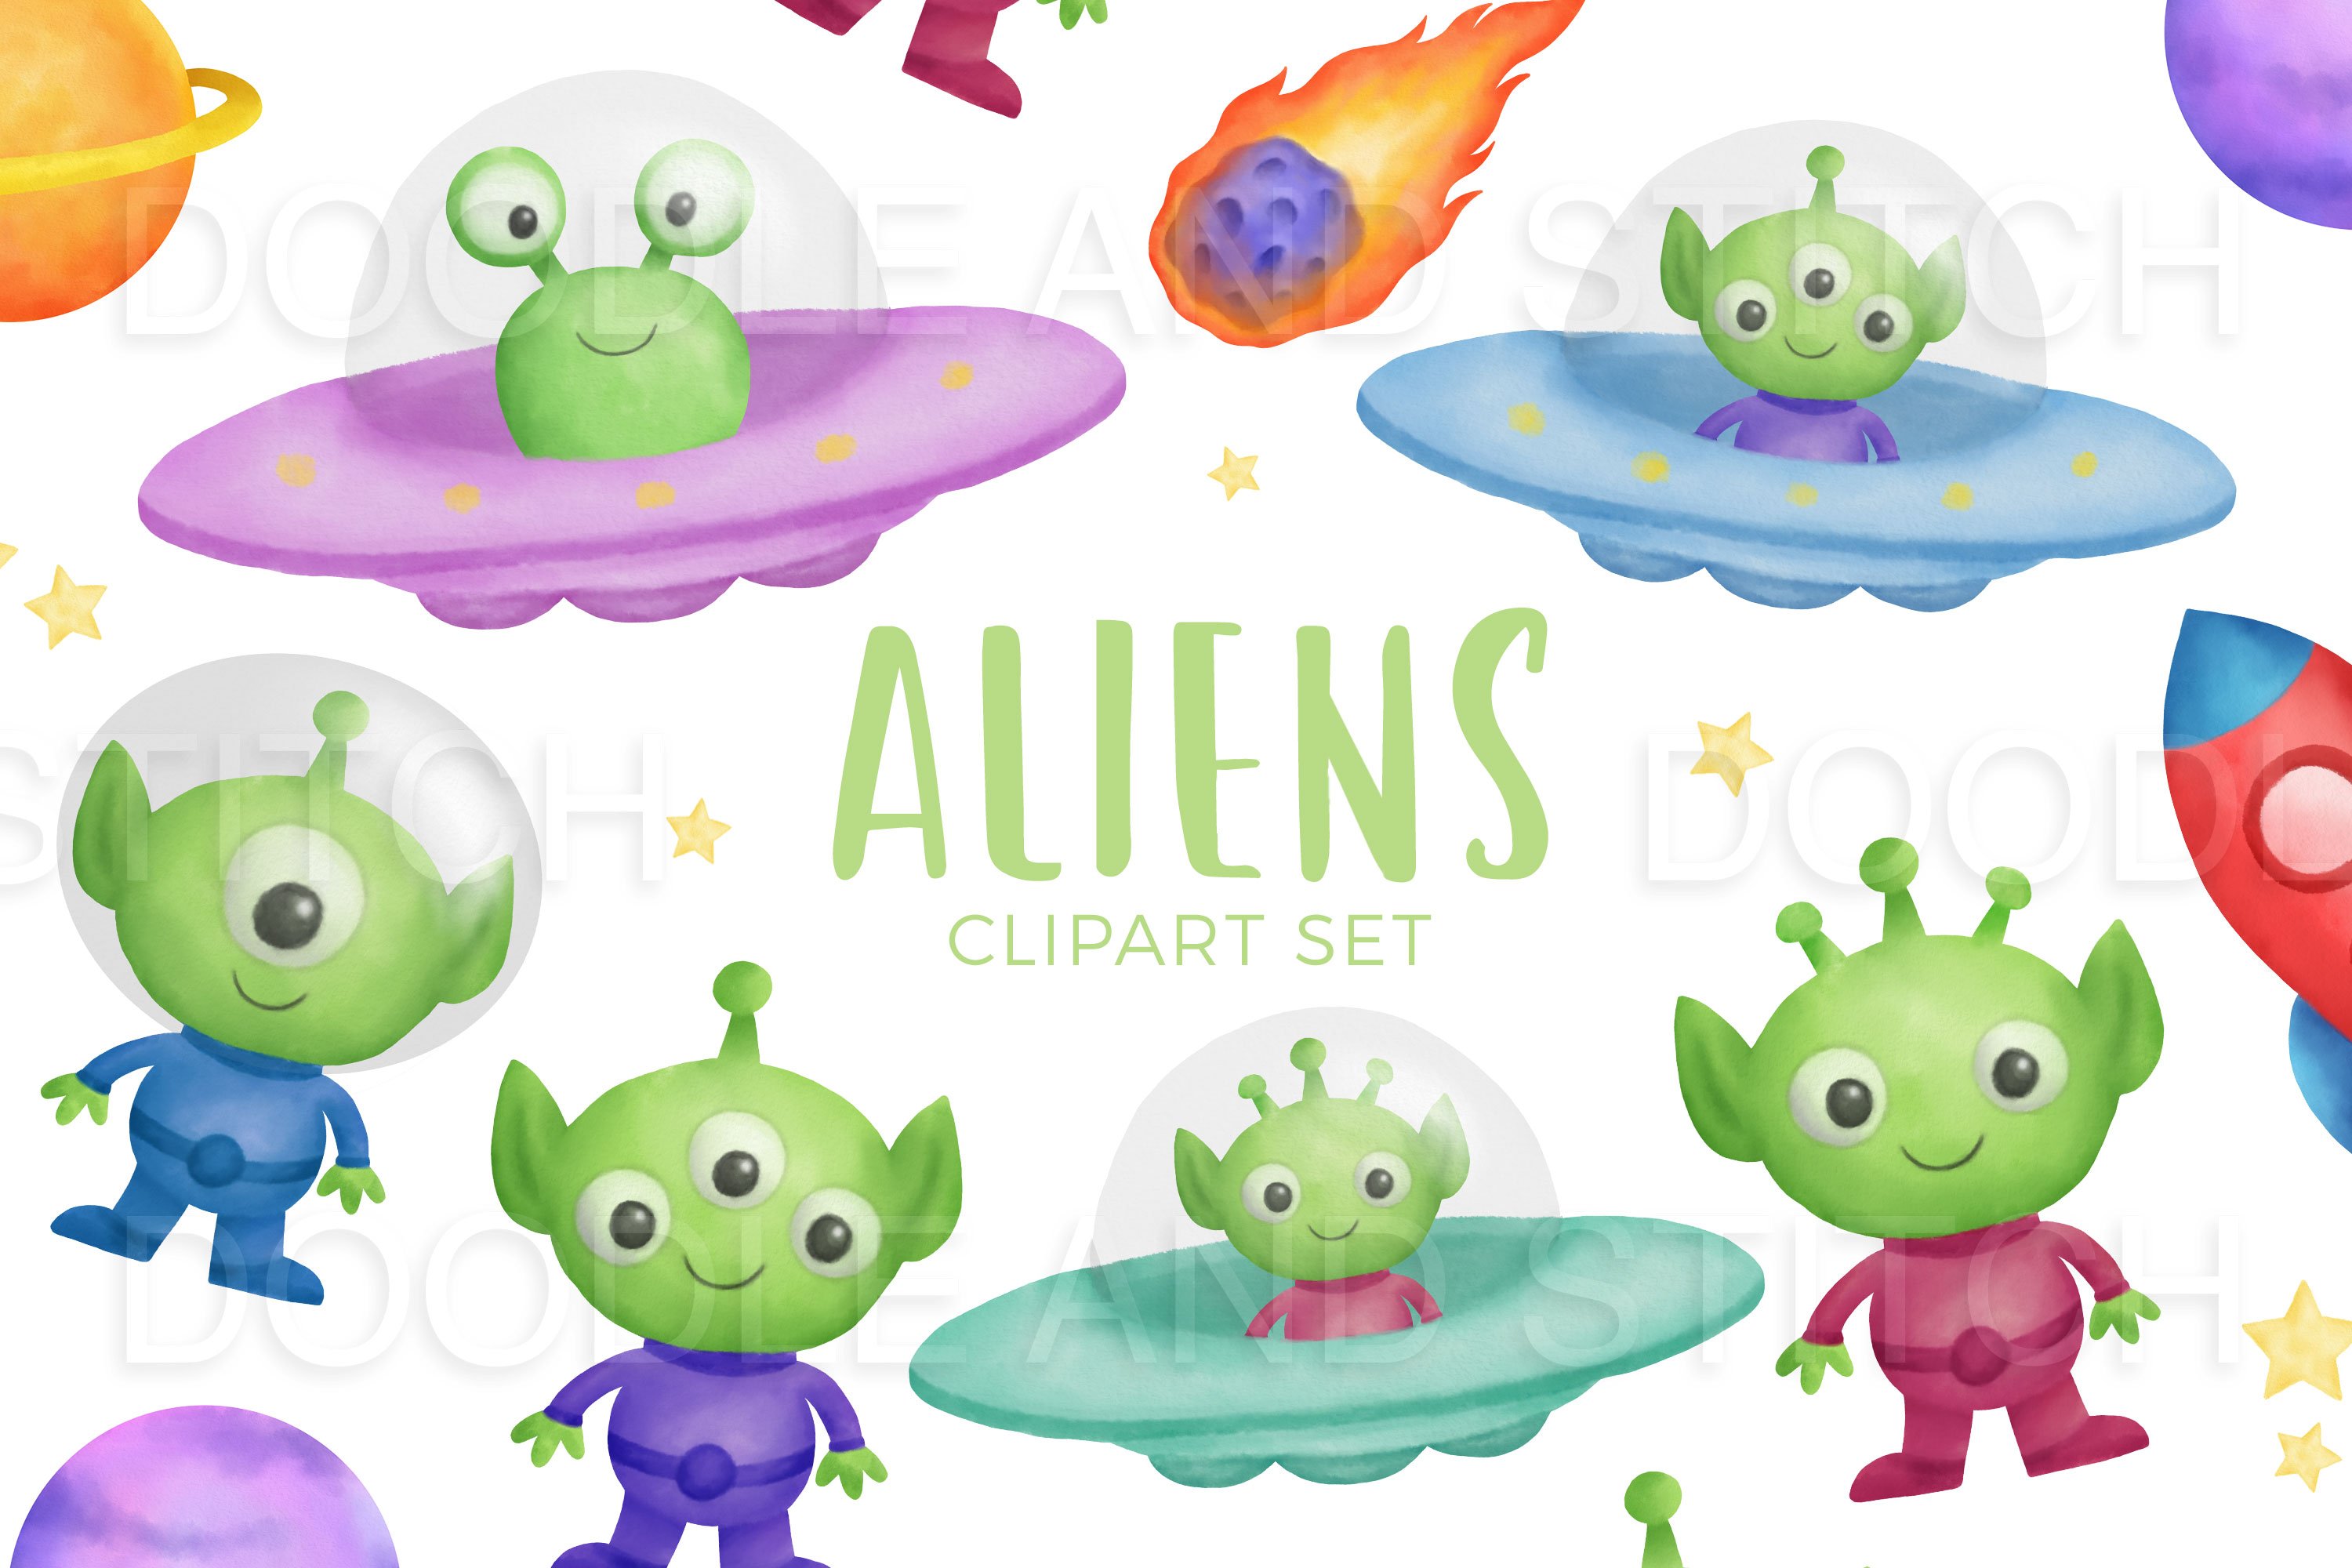 Cute Aliens Clipart Illustrations preview image.